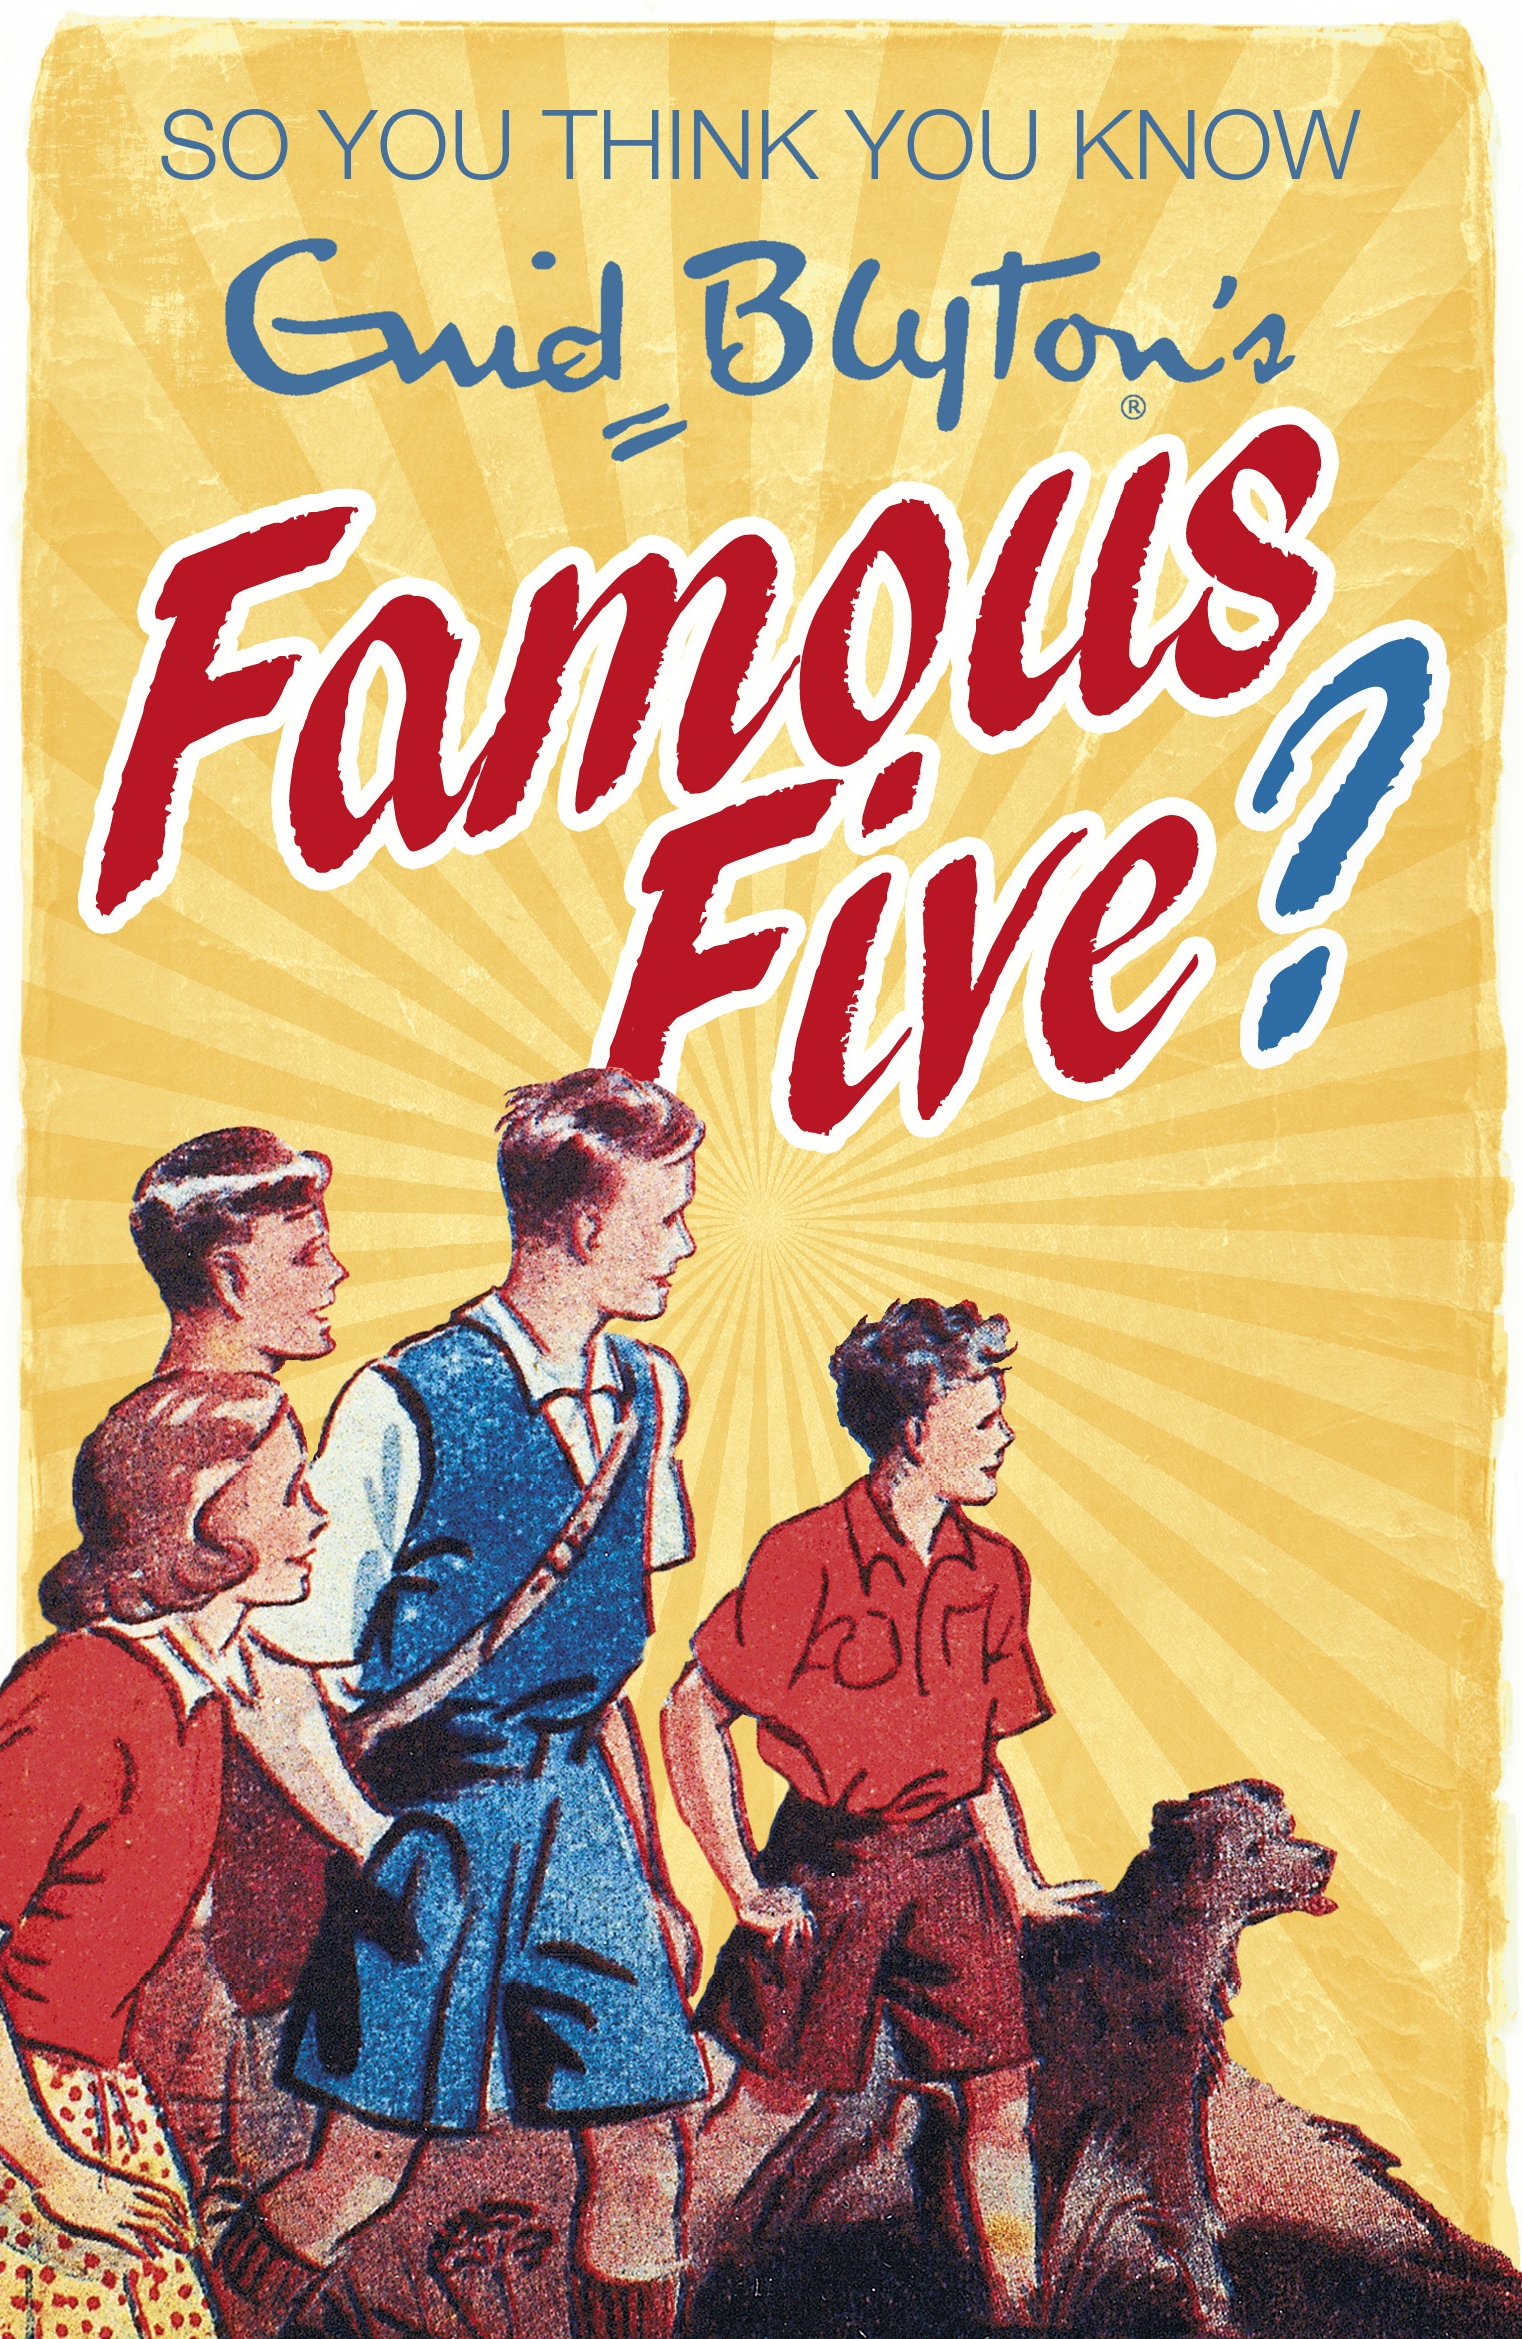 So You Think You Know Enid Blyton's Famous Five by Clive